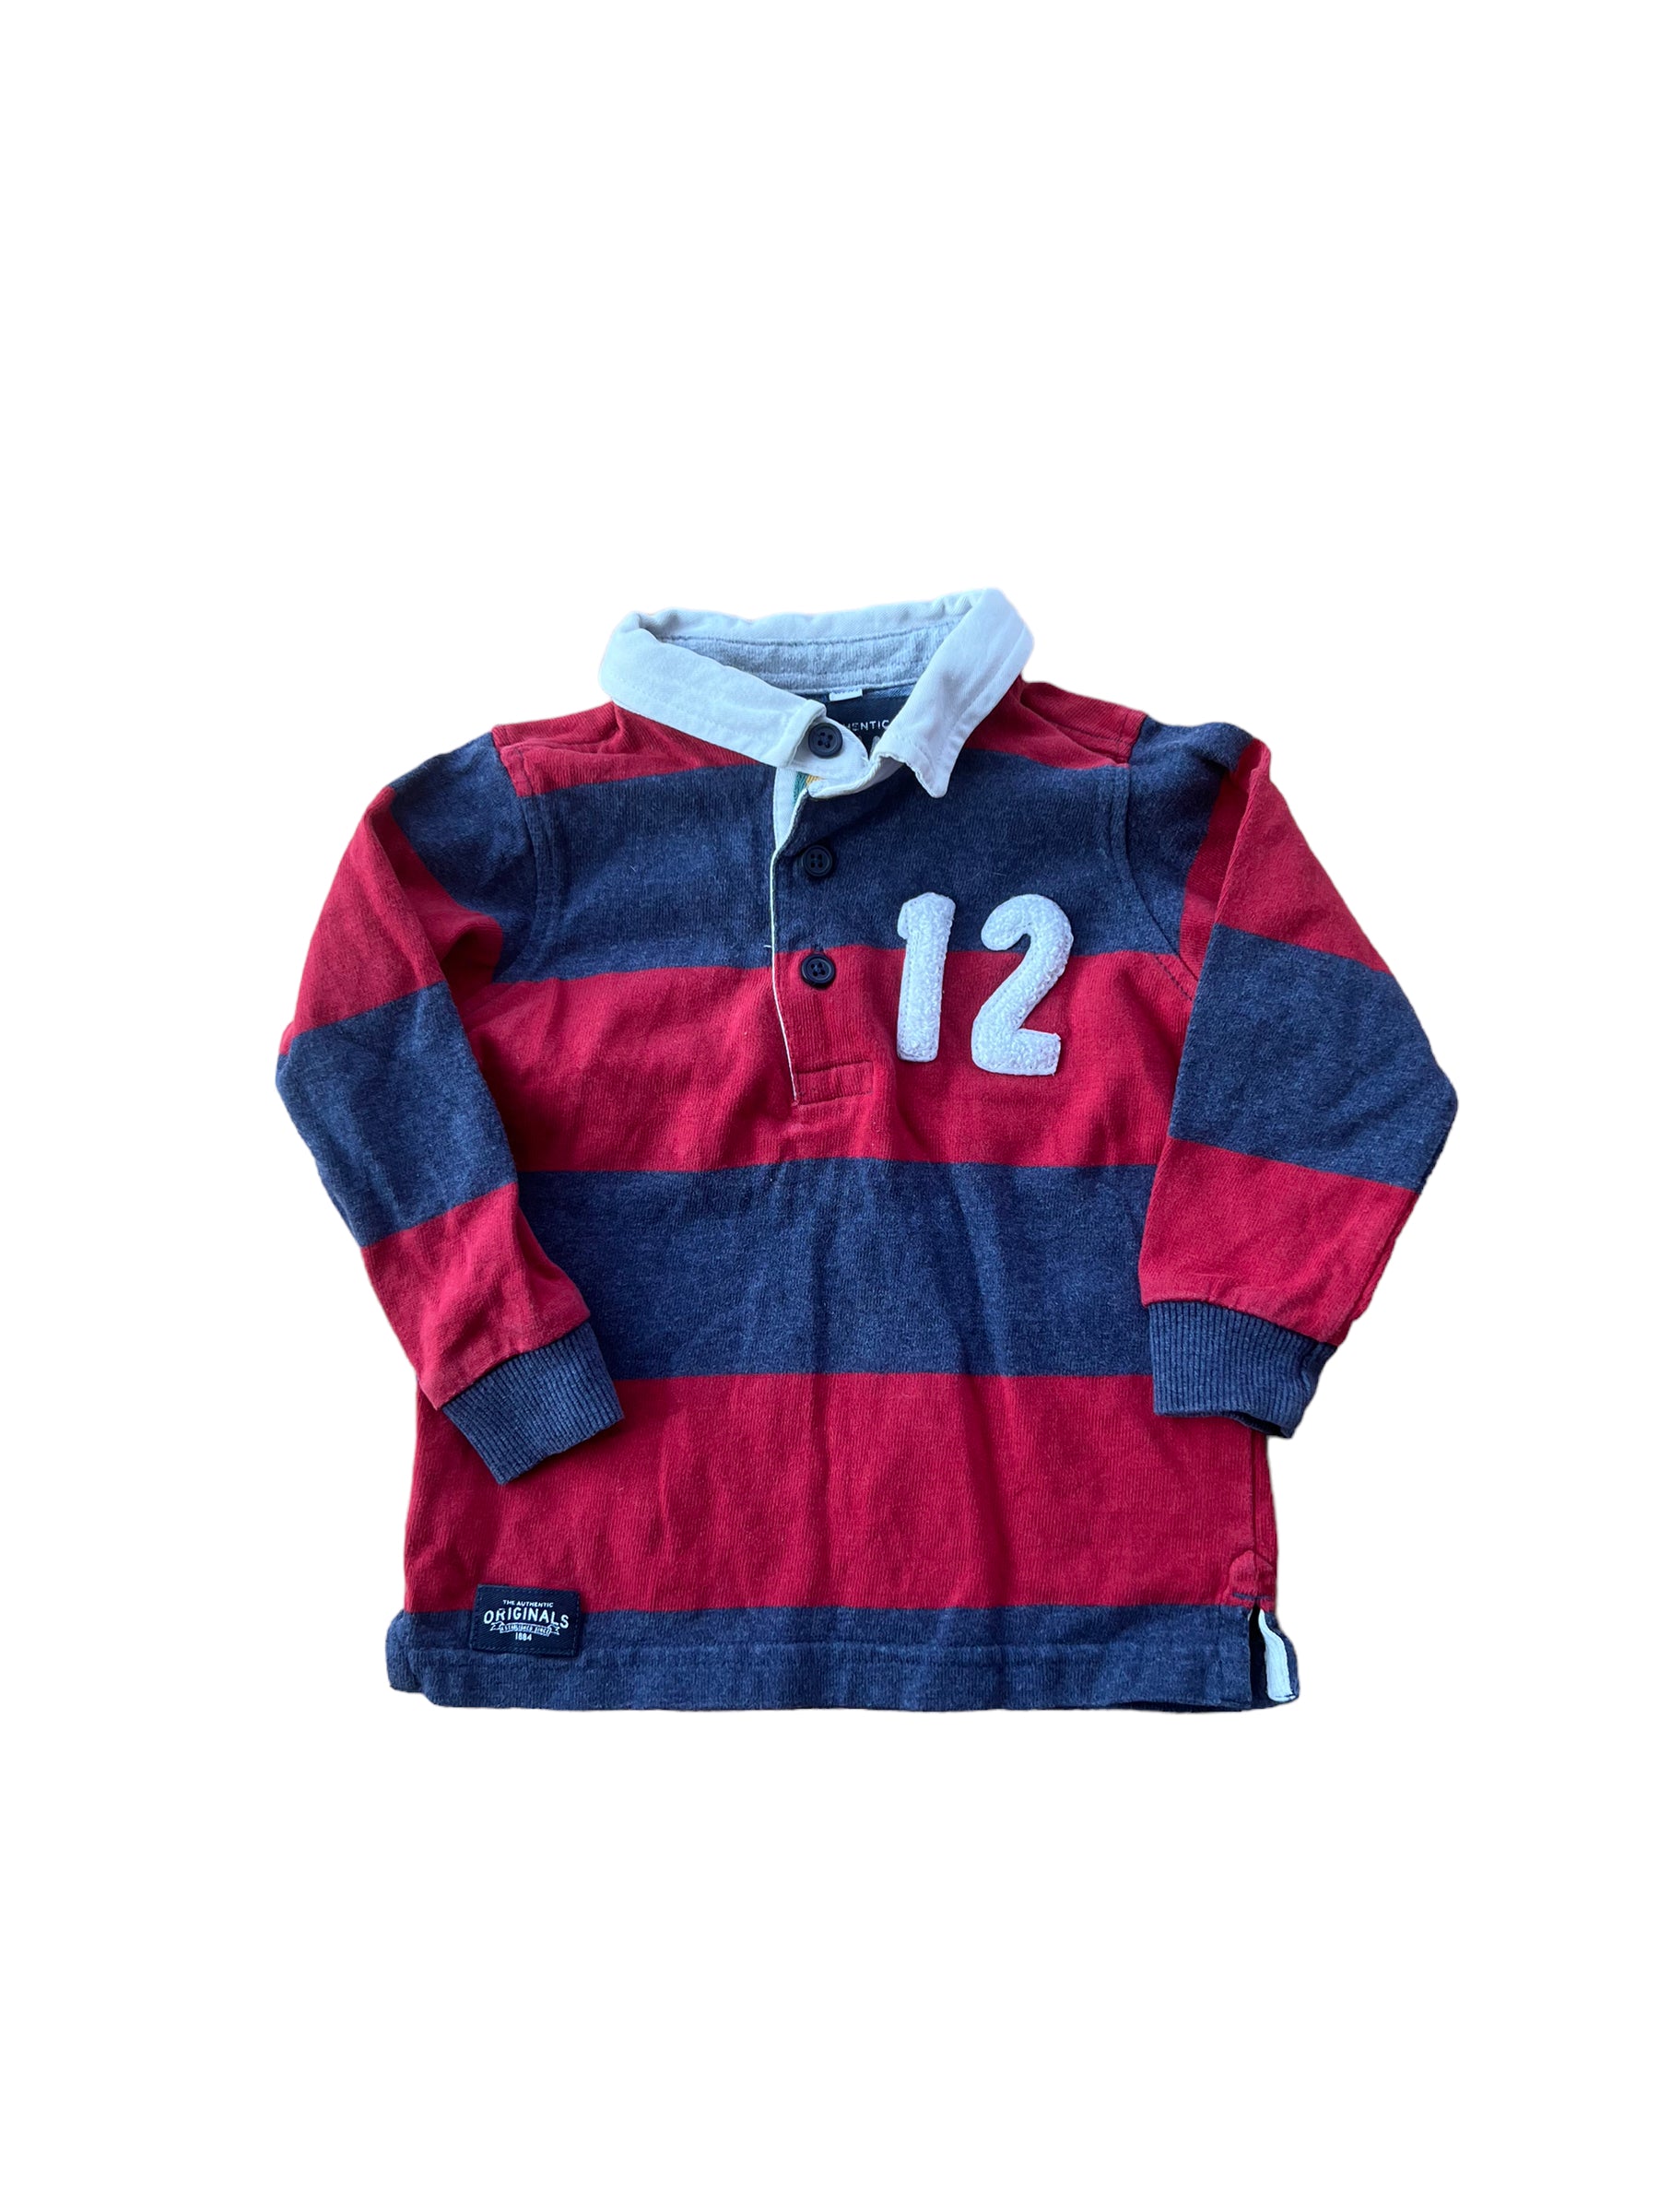 M&S Baby Rugby Top